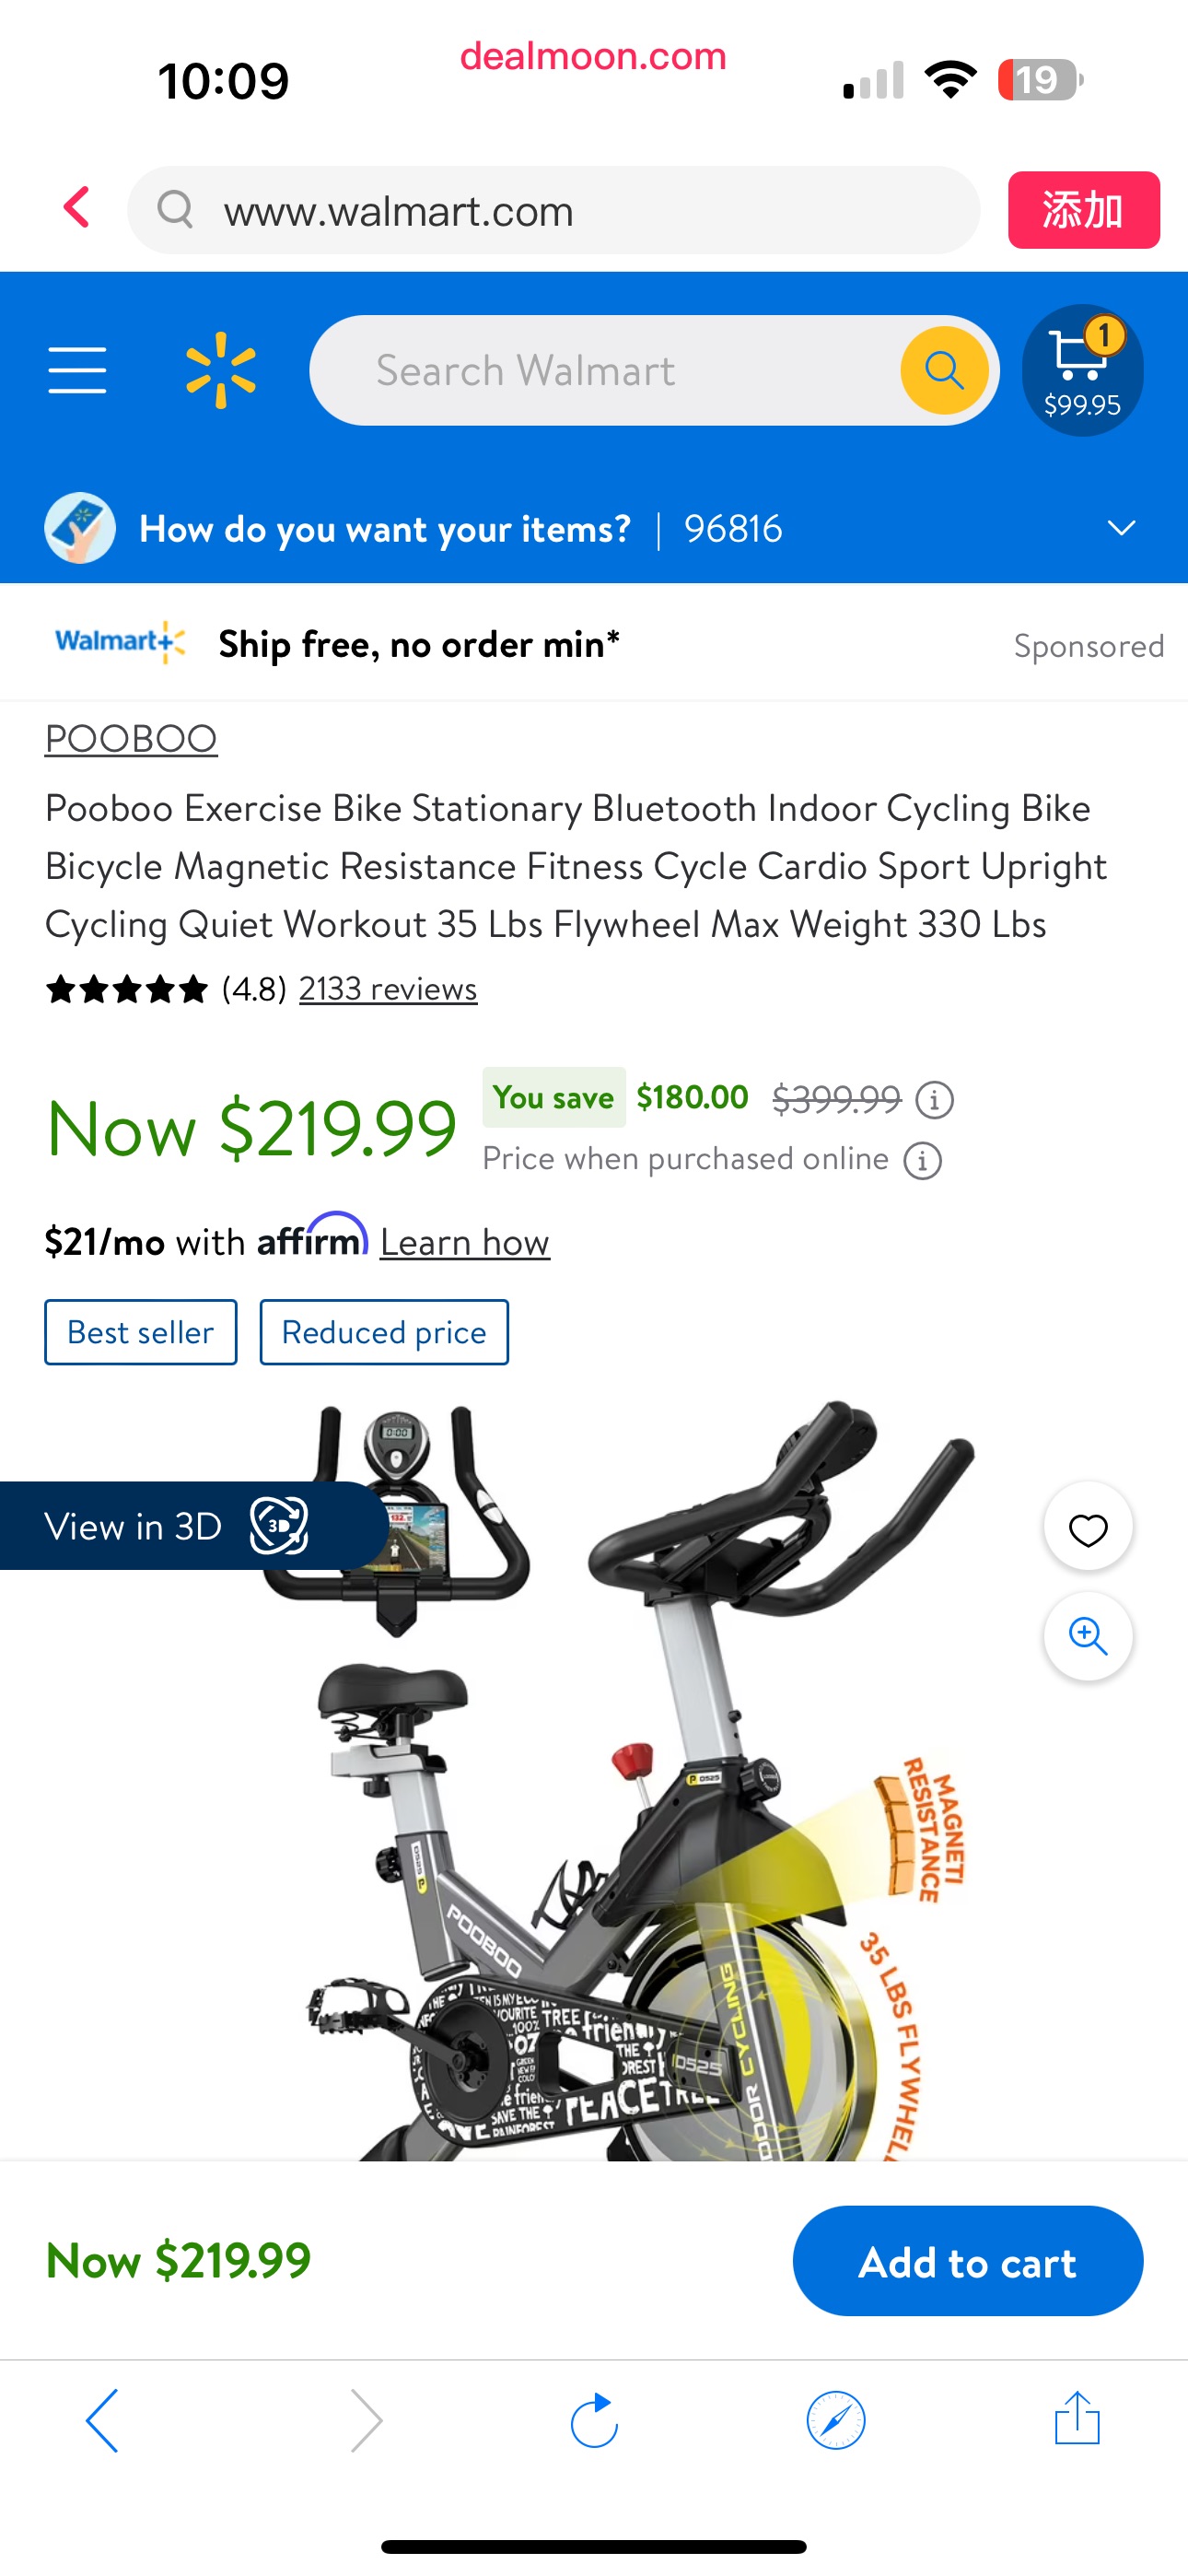 OOBOO
Pooboo Exercise Bike Stationary Bluetooth Indoor Cycling Bike Bicycle Magnetic Resistance Fitness Cycle Cardio Sport Upright Cycling Quiet Workout 35 Lbs Flywheel Max Weight健身自行车